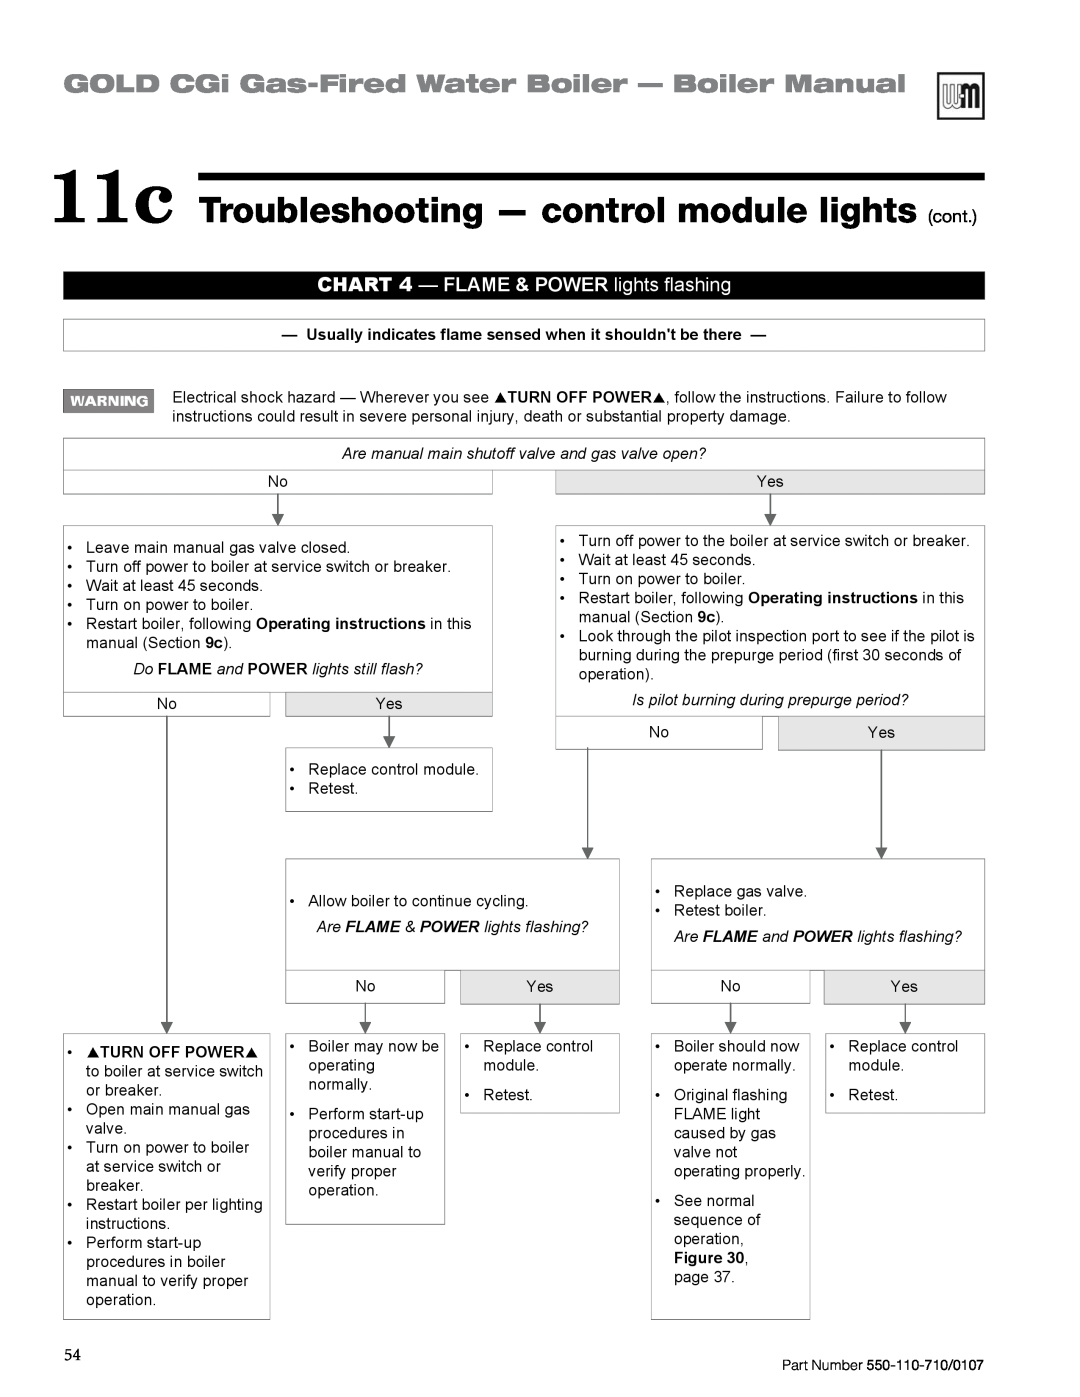 Weil-McLain 550-110-710/0107 11c Troubleshooting — control module lights cont, Do FLAME and POWER lights still flash? 